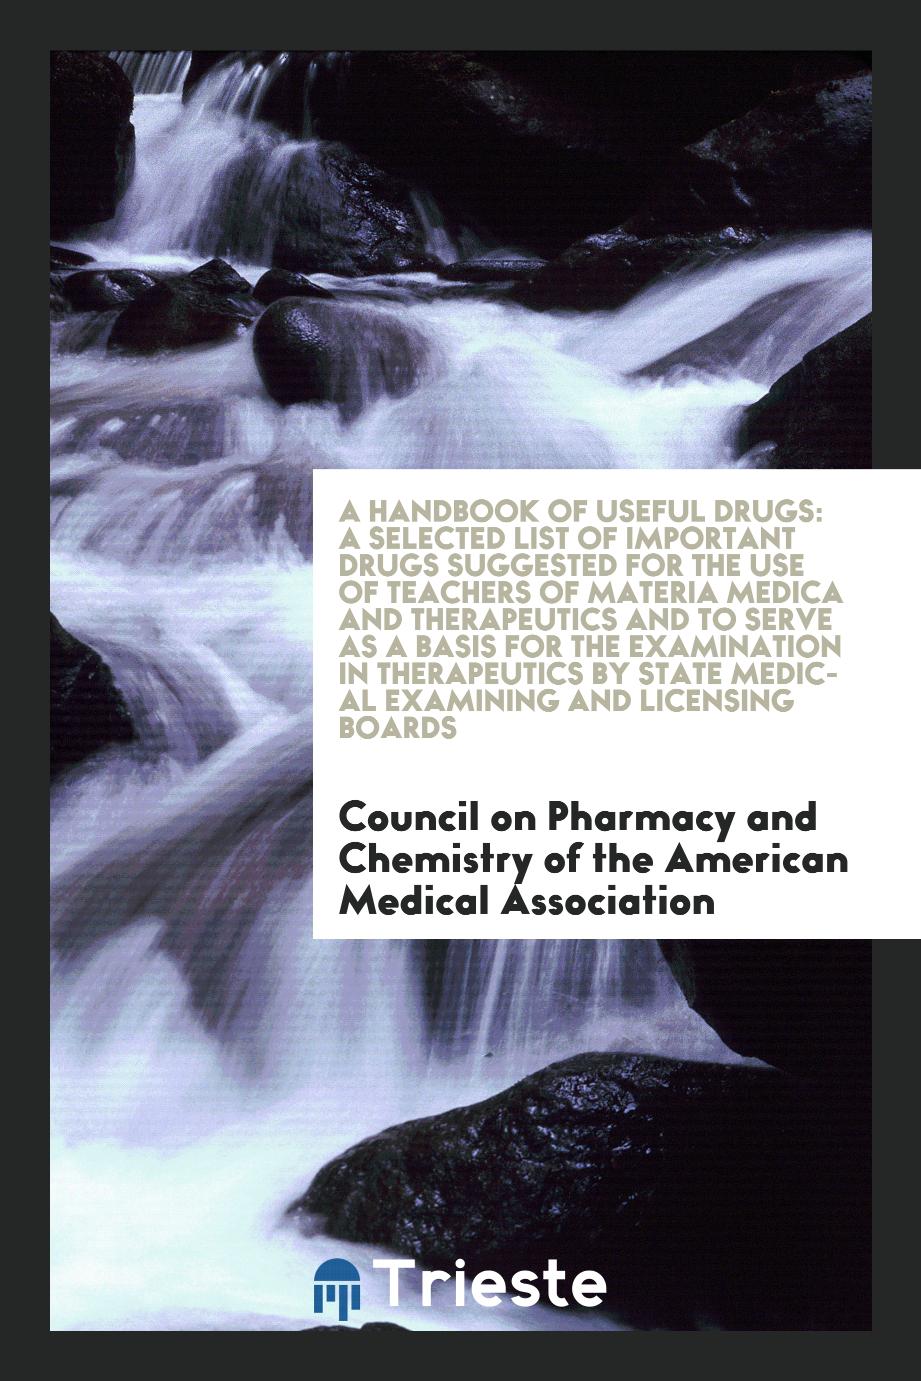 A handbook of useful drugs: a selected list of important drugs suggested for the use of teachers of materia medica and therapeutics and to serve as a basis for the examination in therapeutics by state medical examining and licensing boards